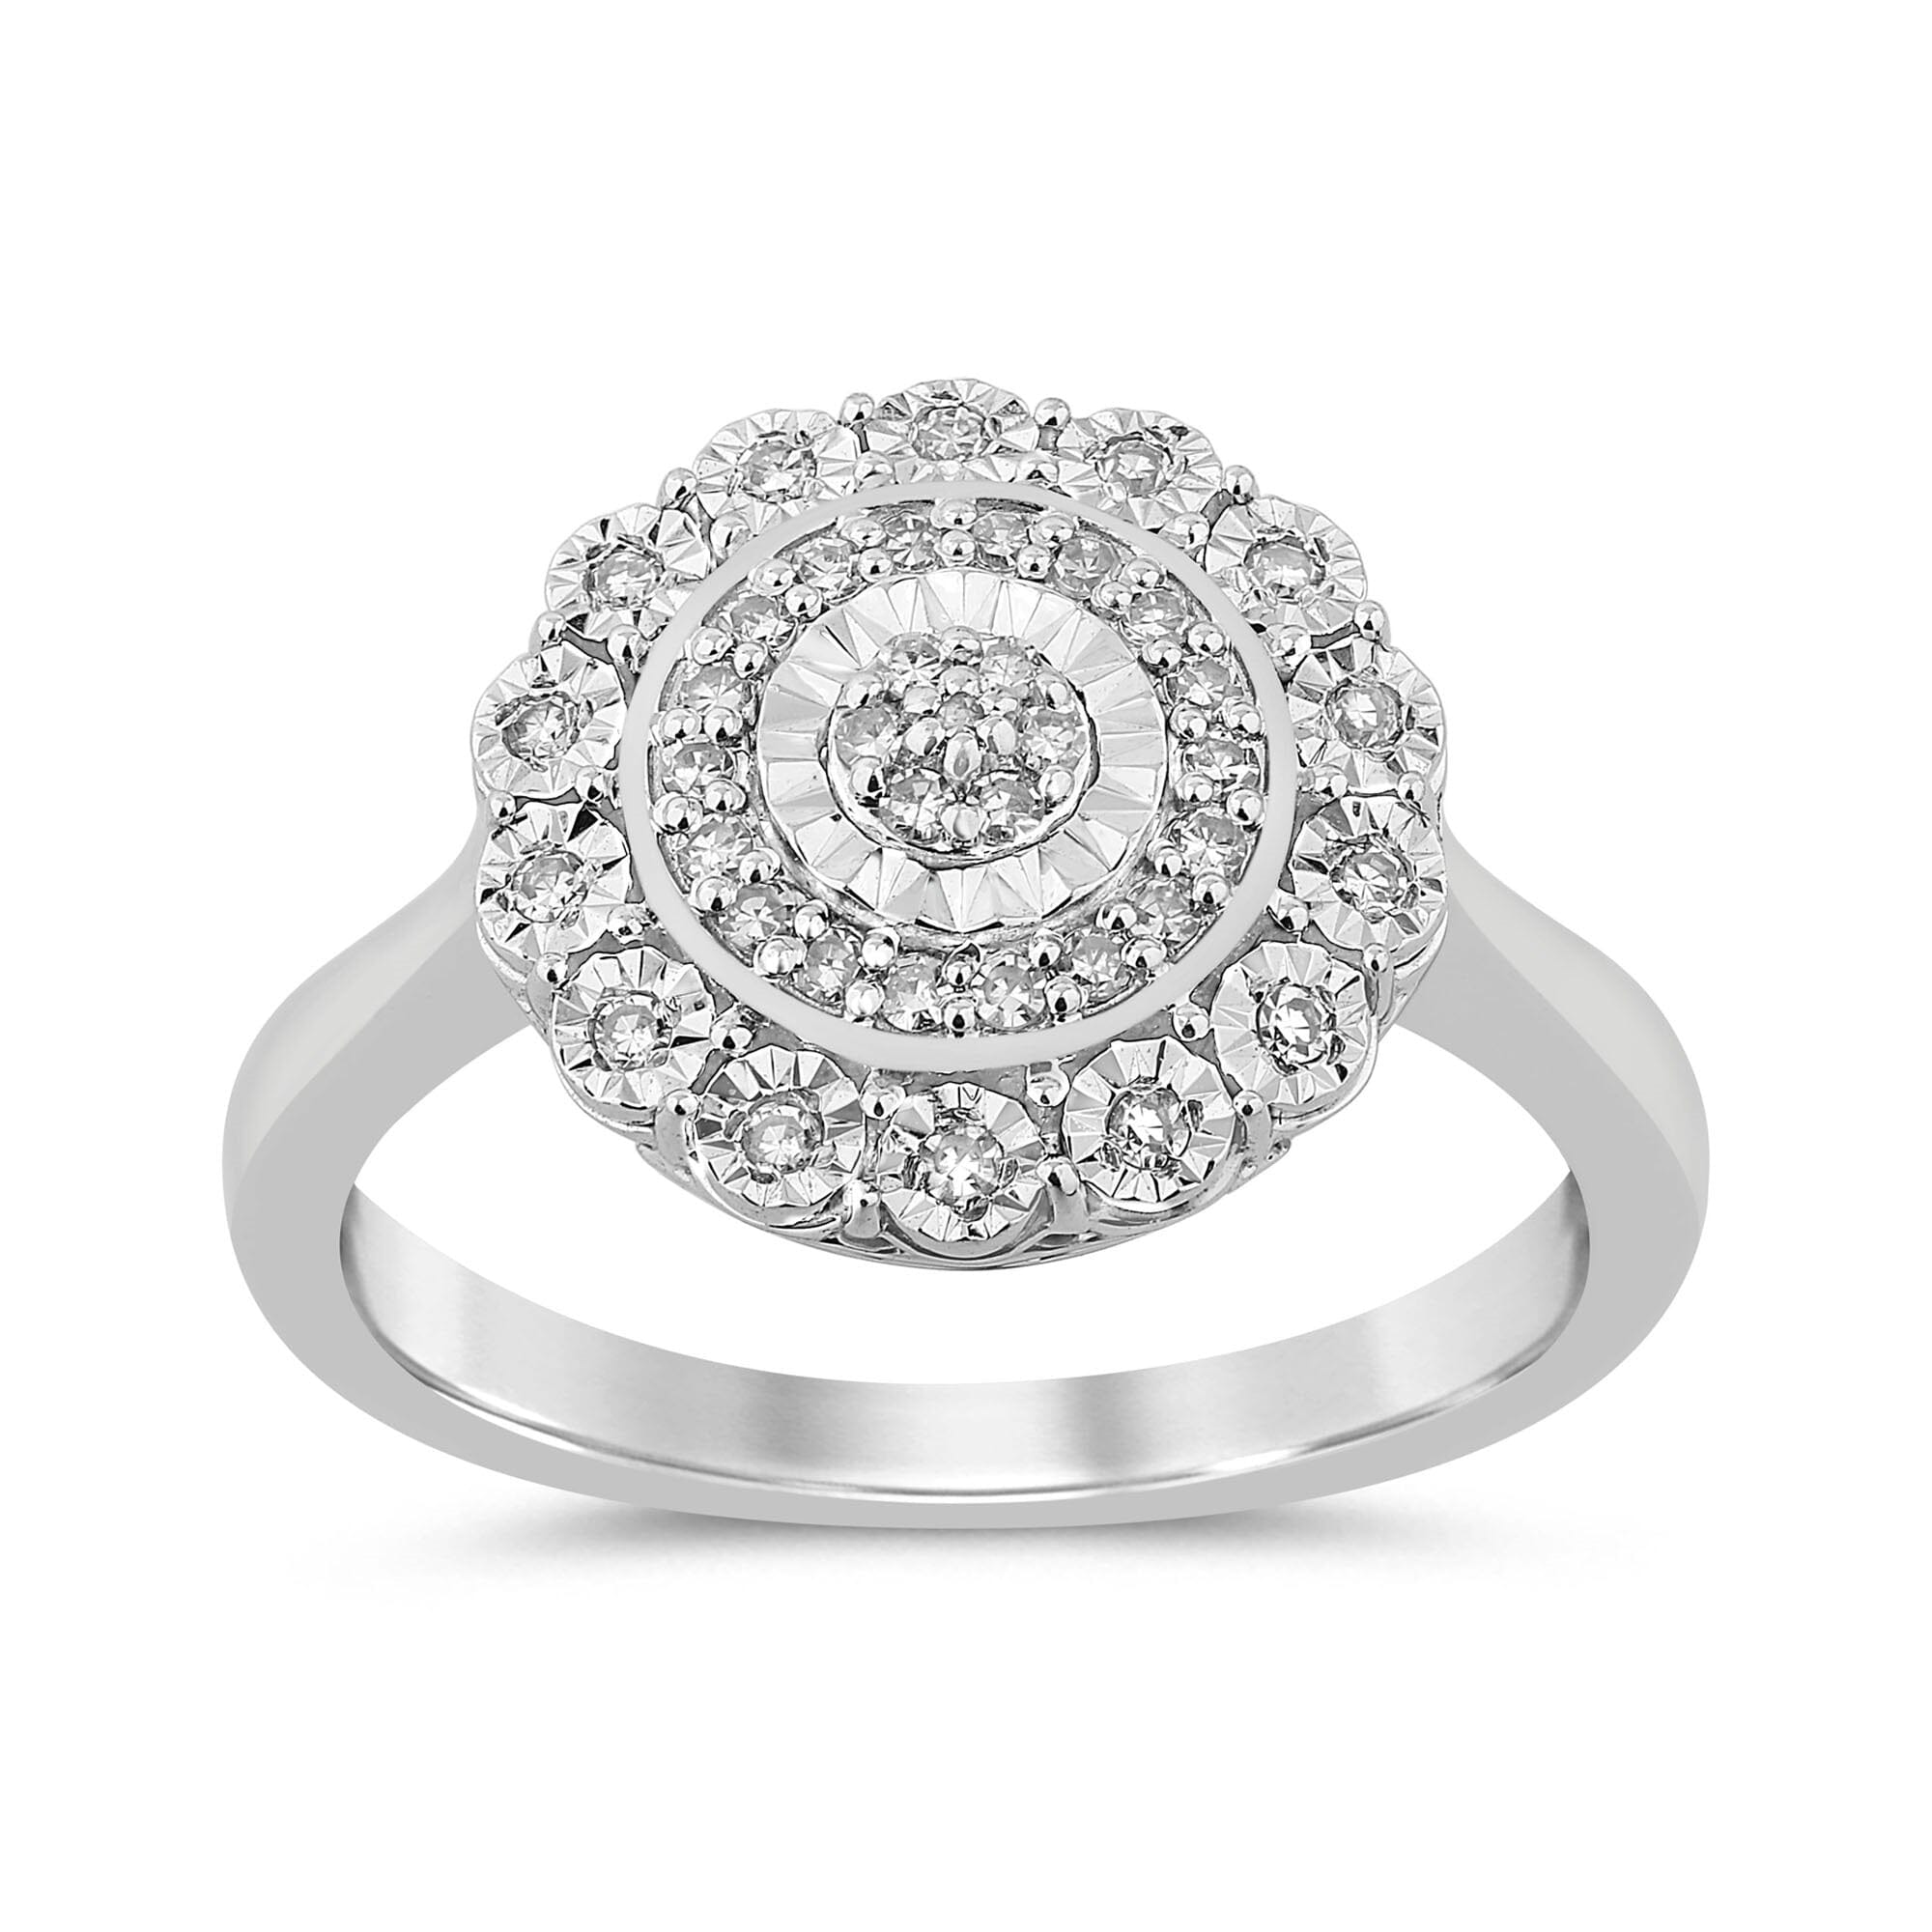 Double Halo Ring with 0.15ct of Diamonds in Sterling Silver Rings Bevilles 